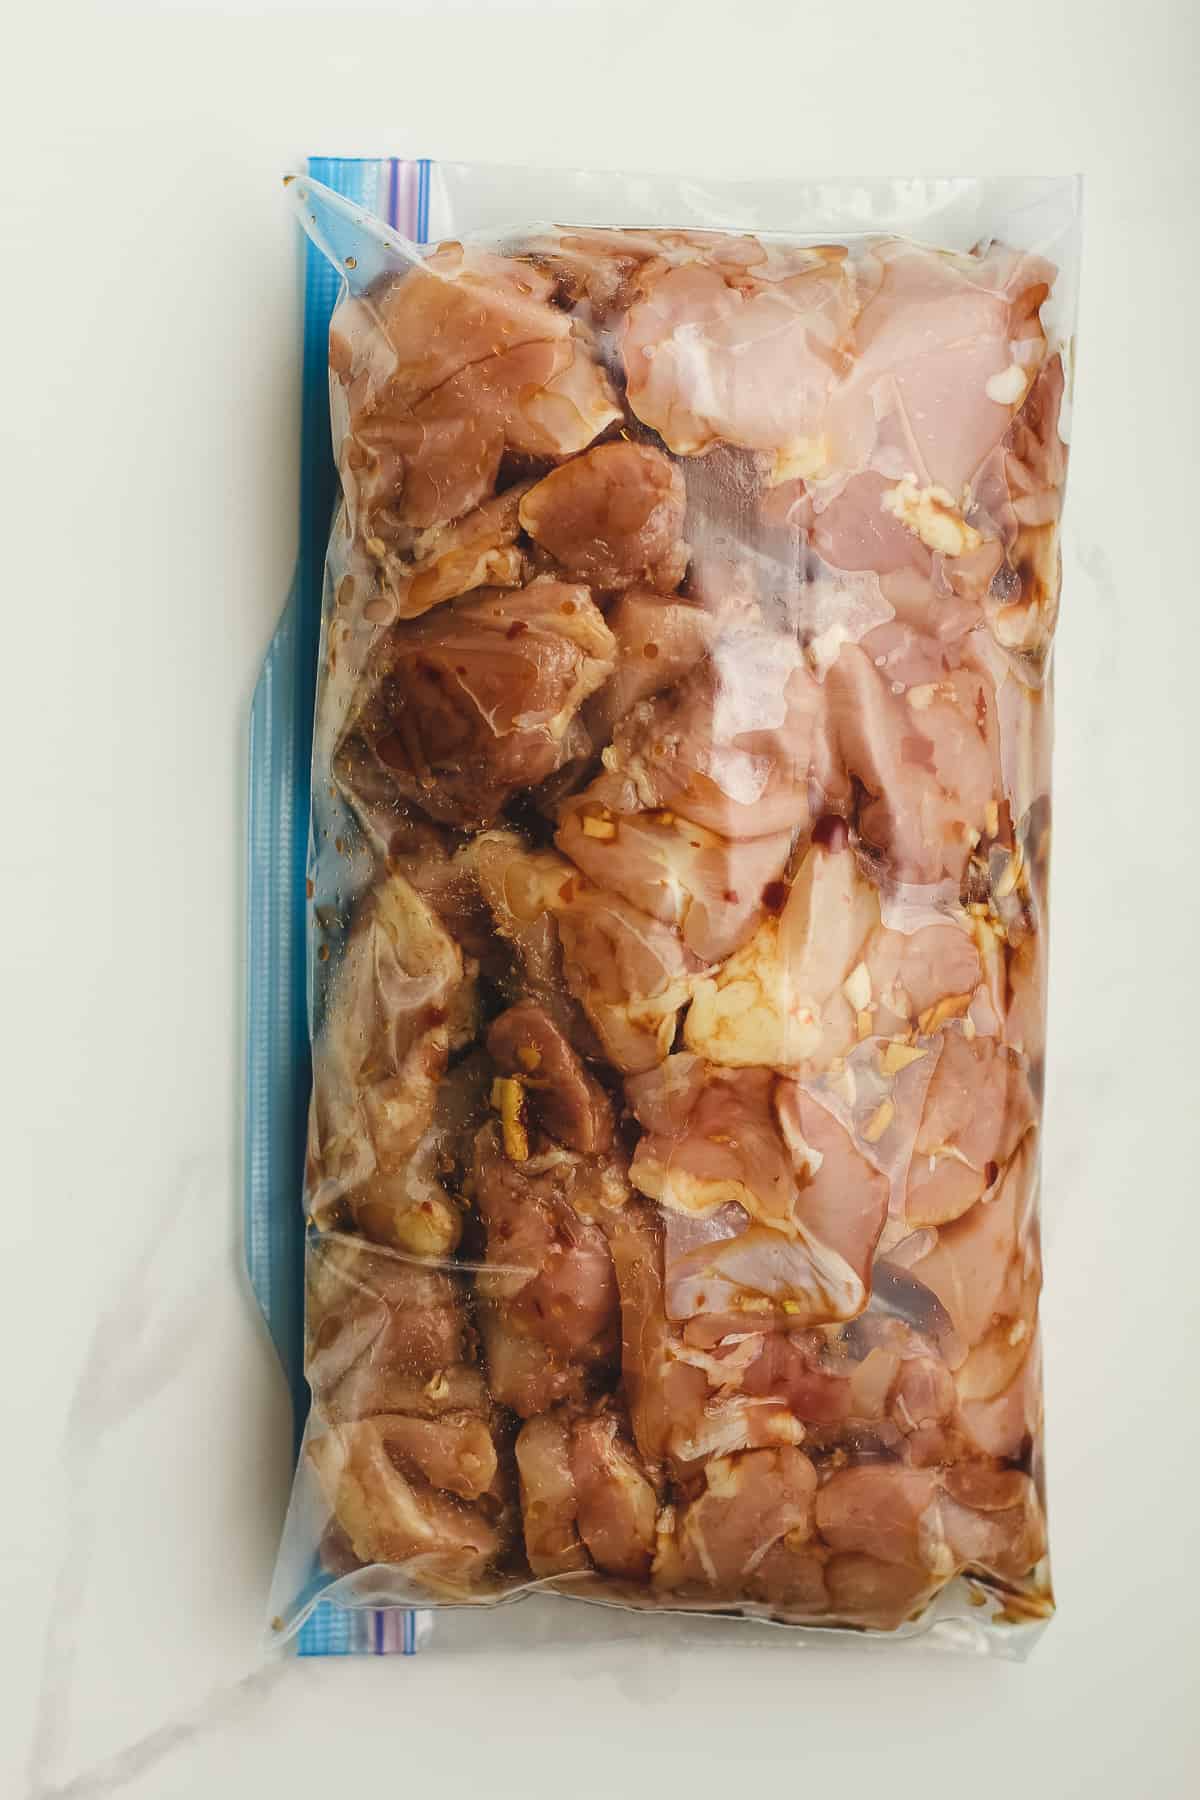 A plastic bag of marinated chicken.